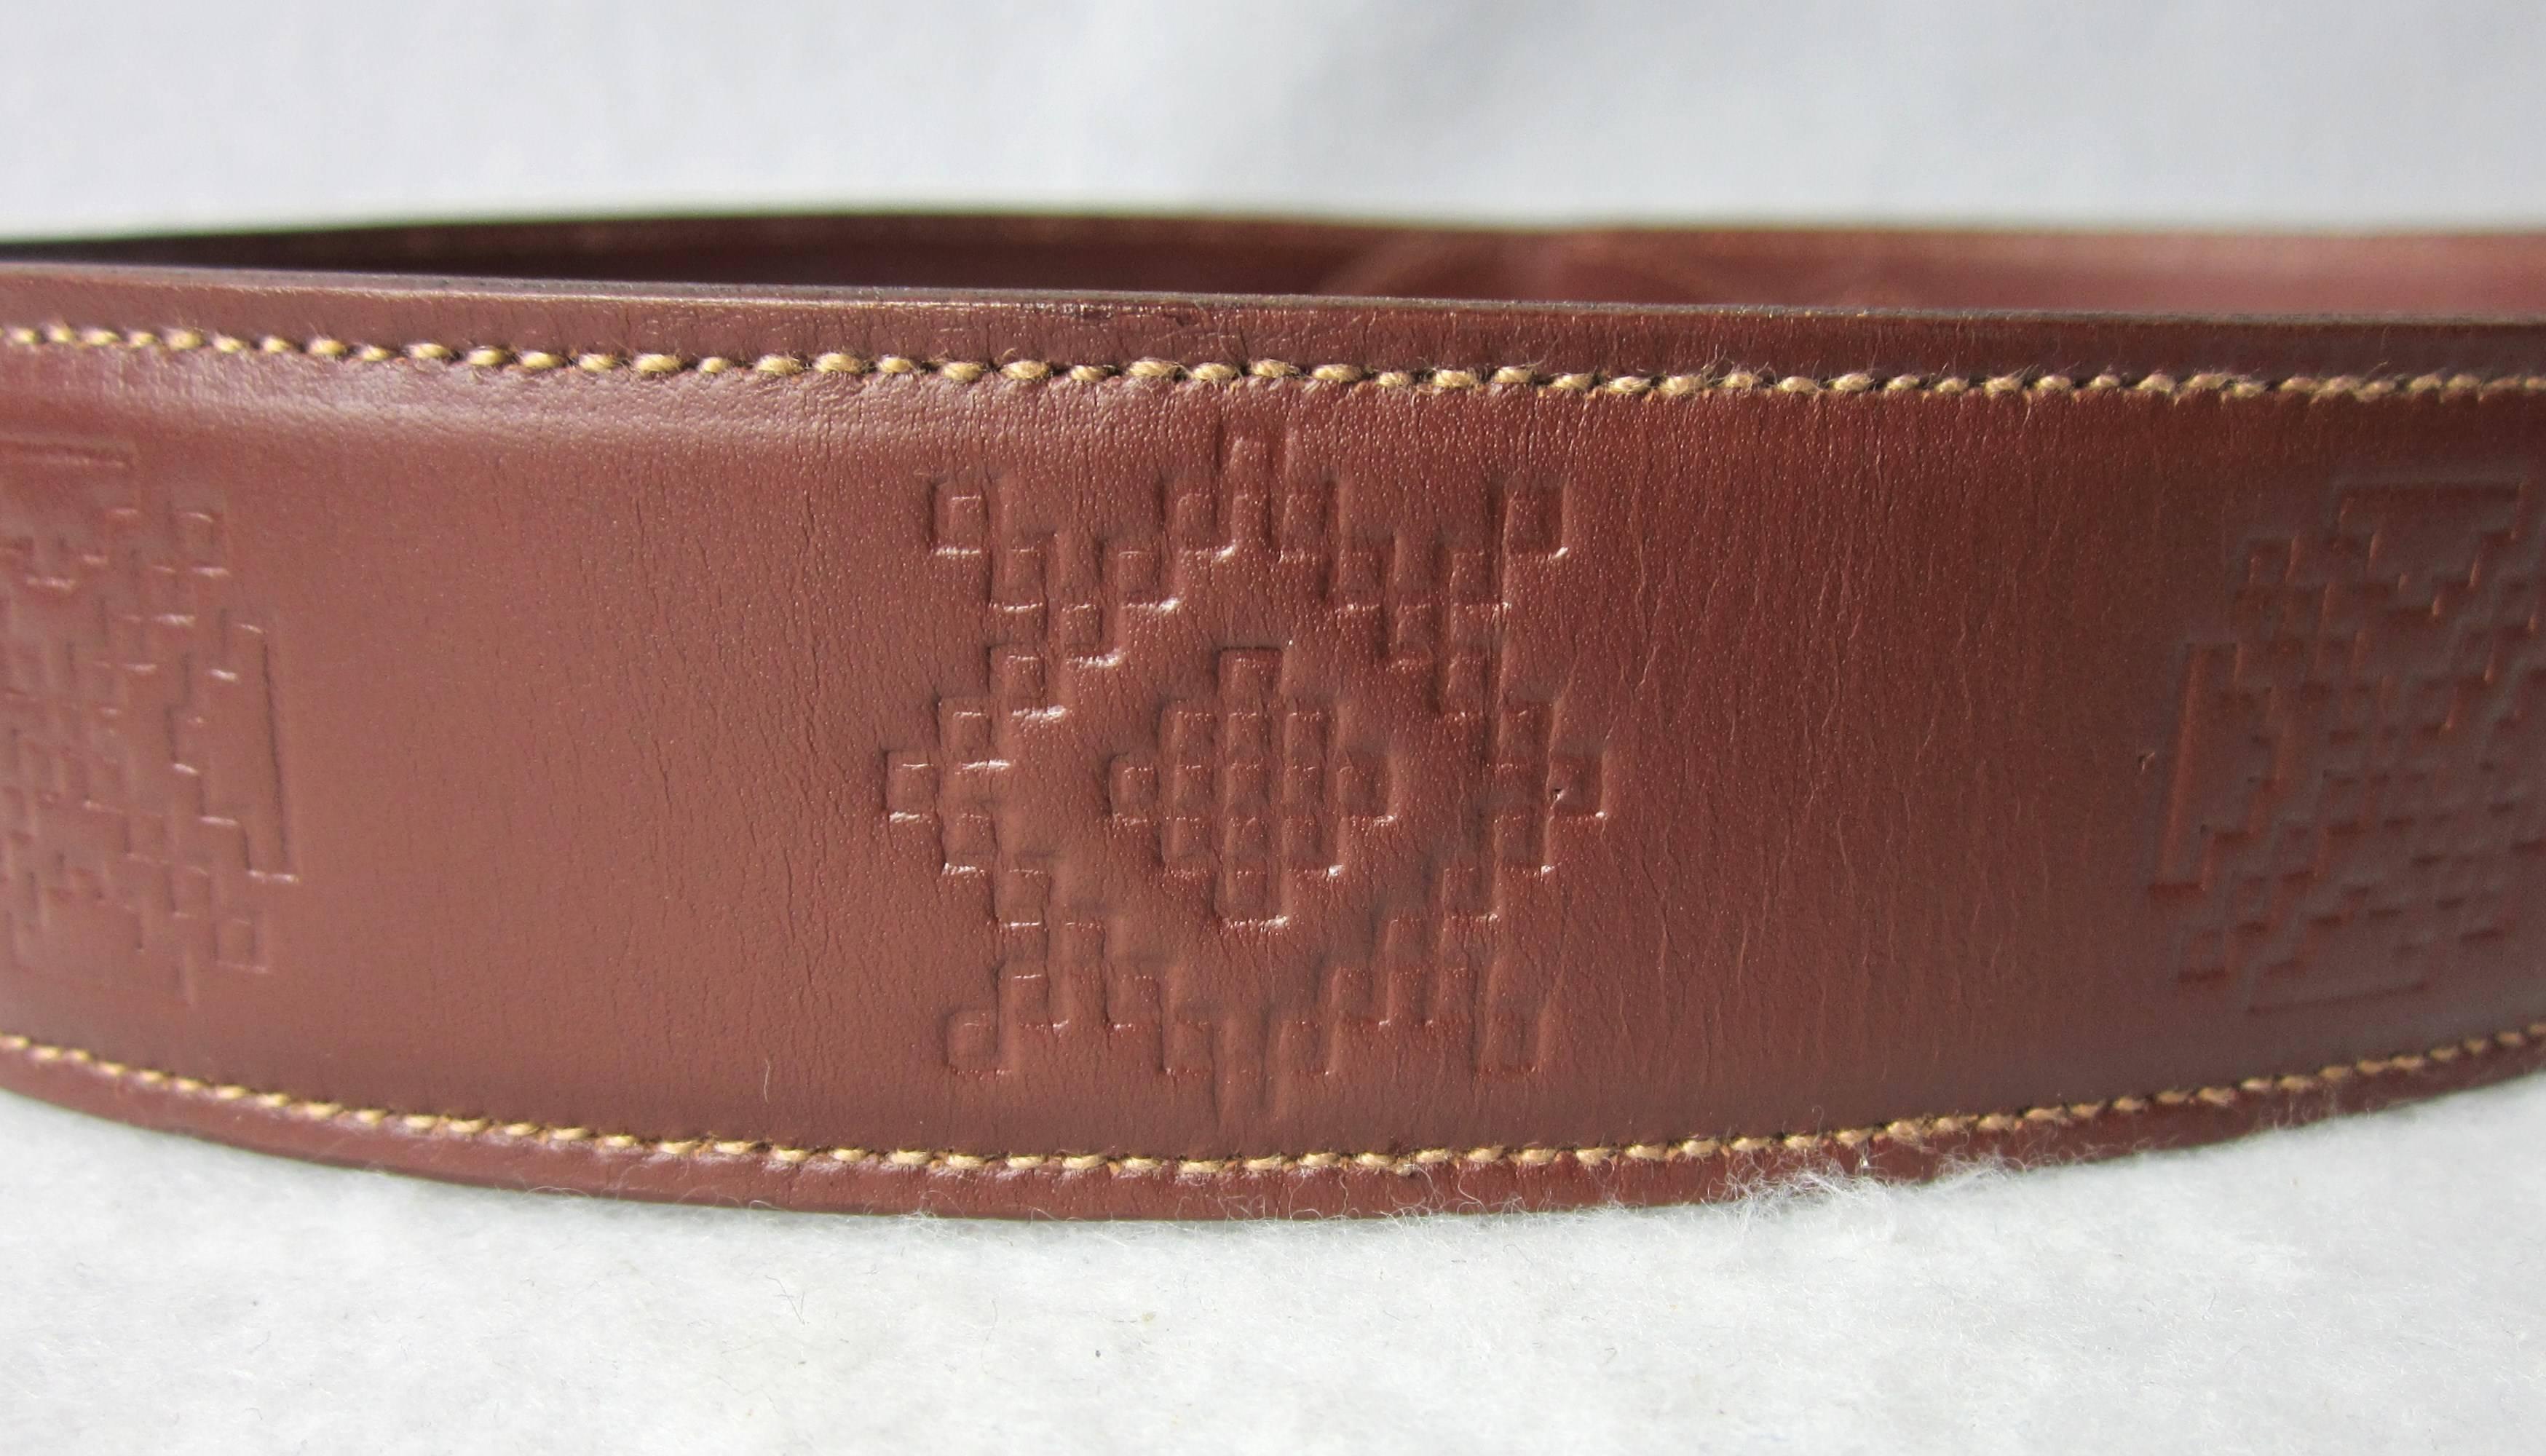 Brown leather Gucci Belt
Does not appear to ever been worn
size labeled 85-34
Can be worn by a woman or man
Measuring 
38